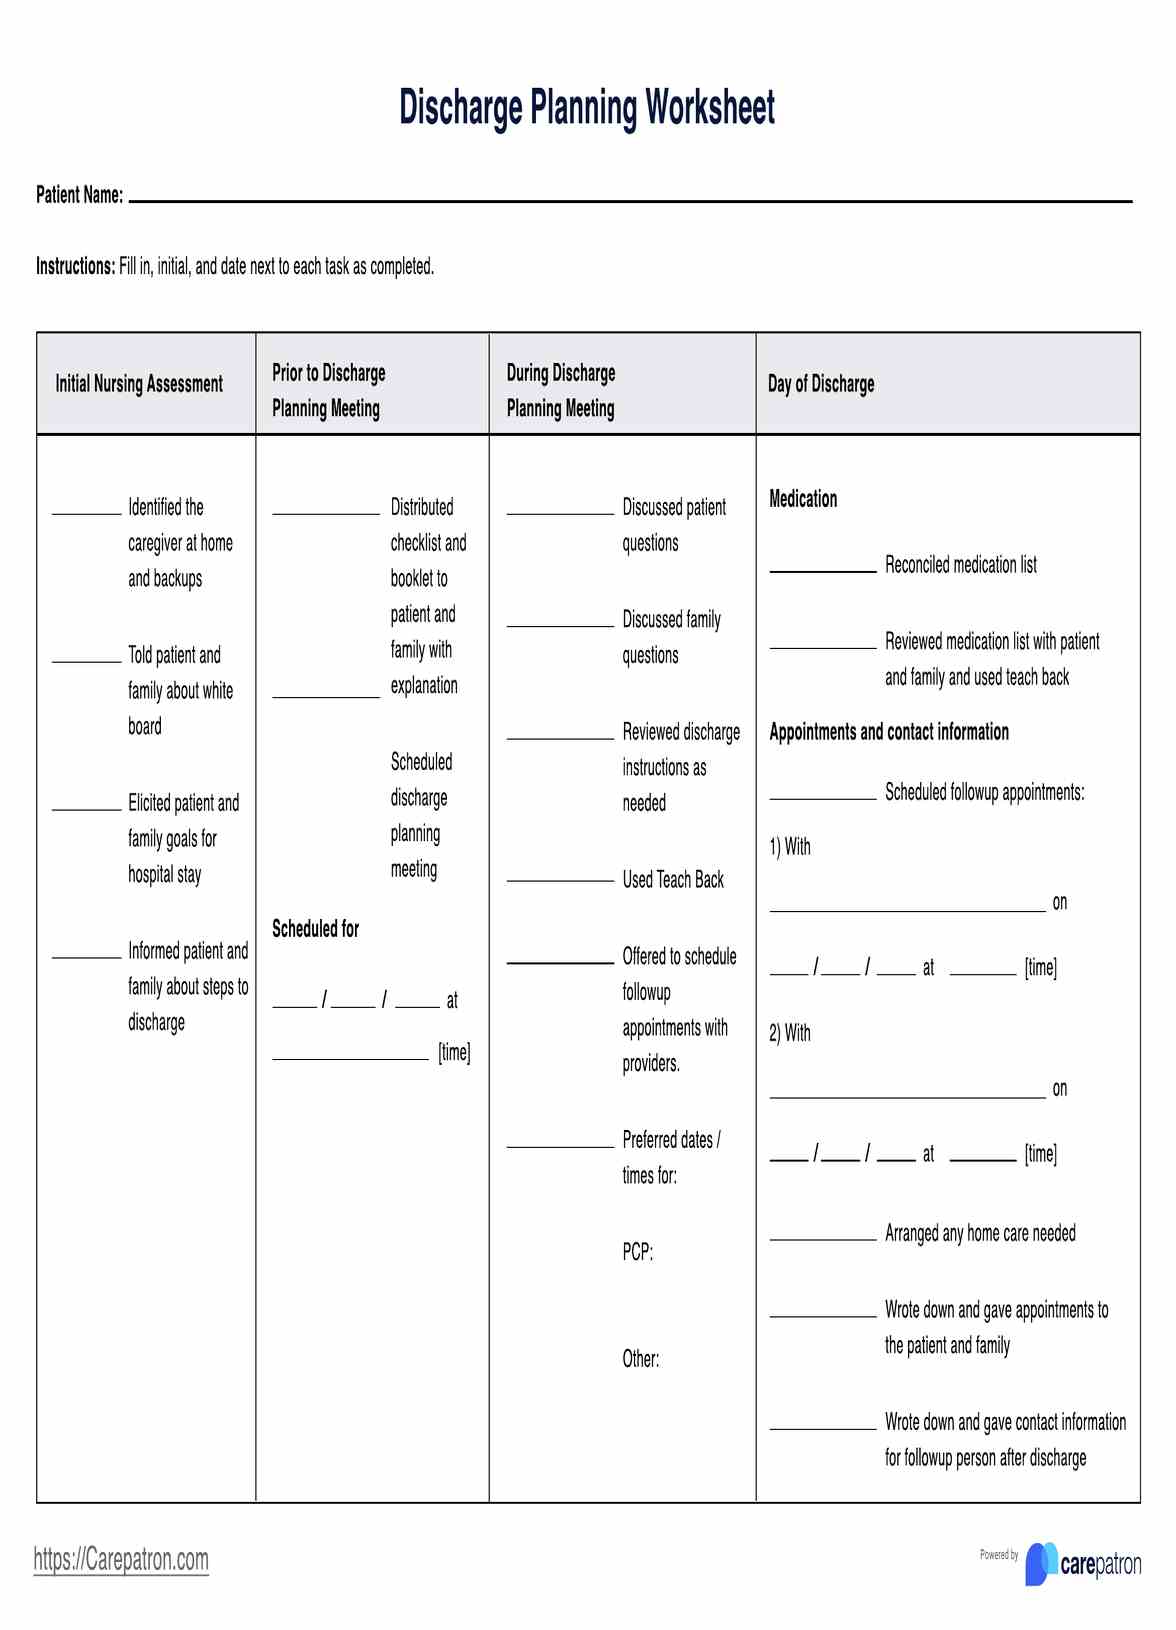 Discharge Planning Worksheets PDF Example